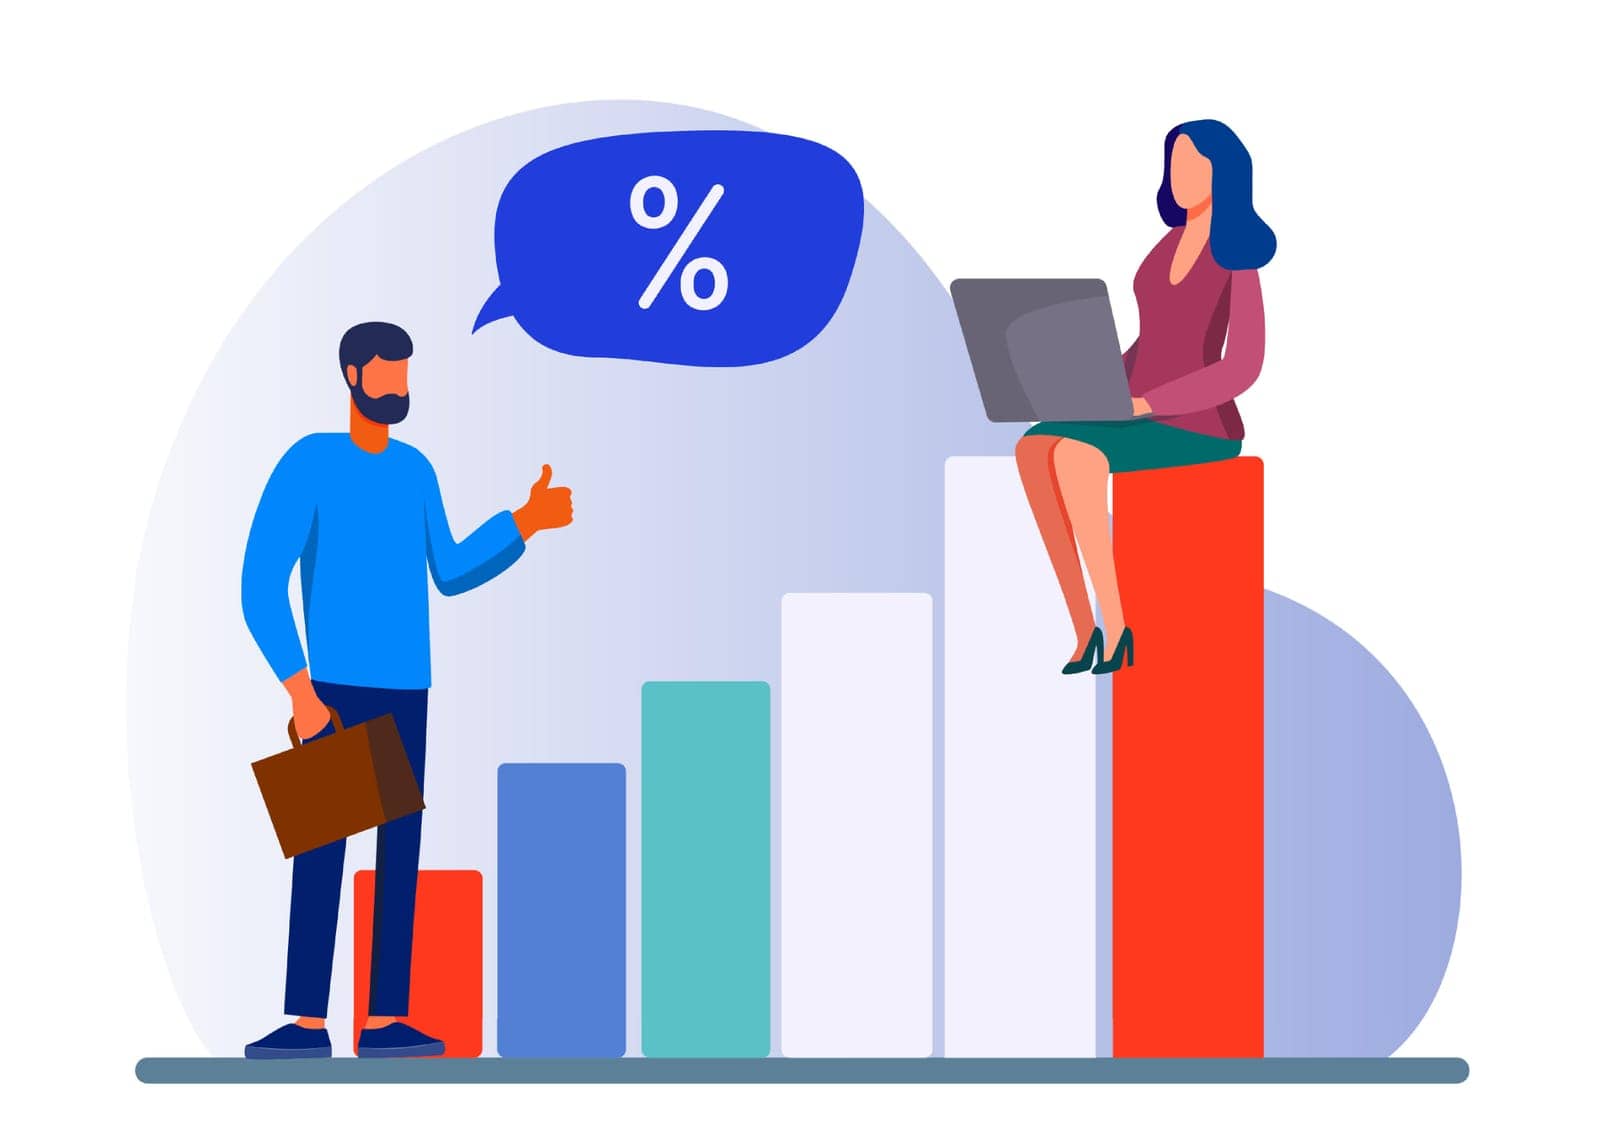 Bank client and manager discussing interest rate. People talking, using laptop, growth bar chart flat vector illustration. Finance, loan concept for banner, website design or landing web page